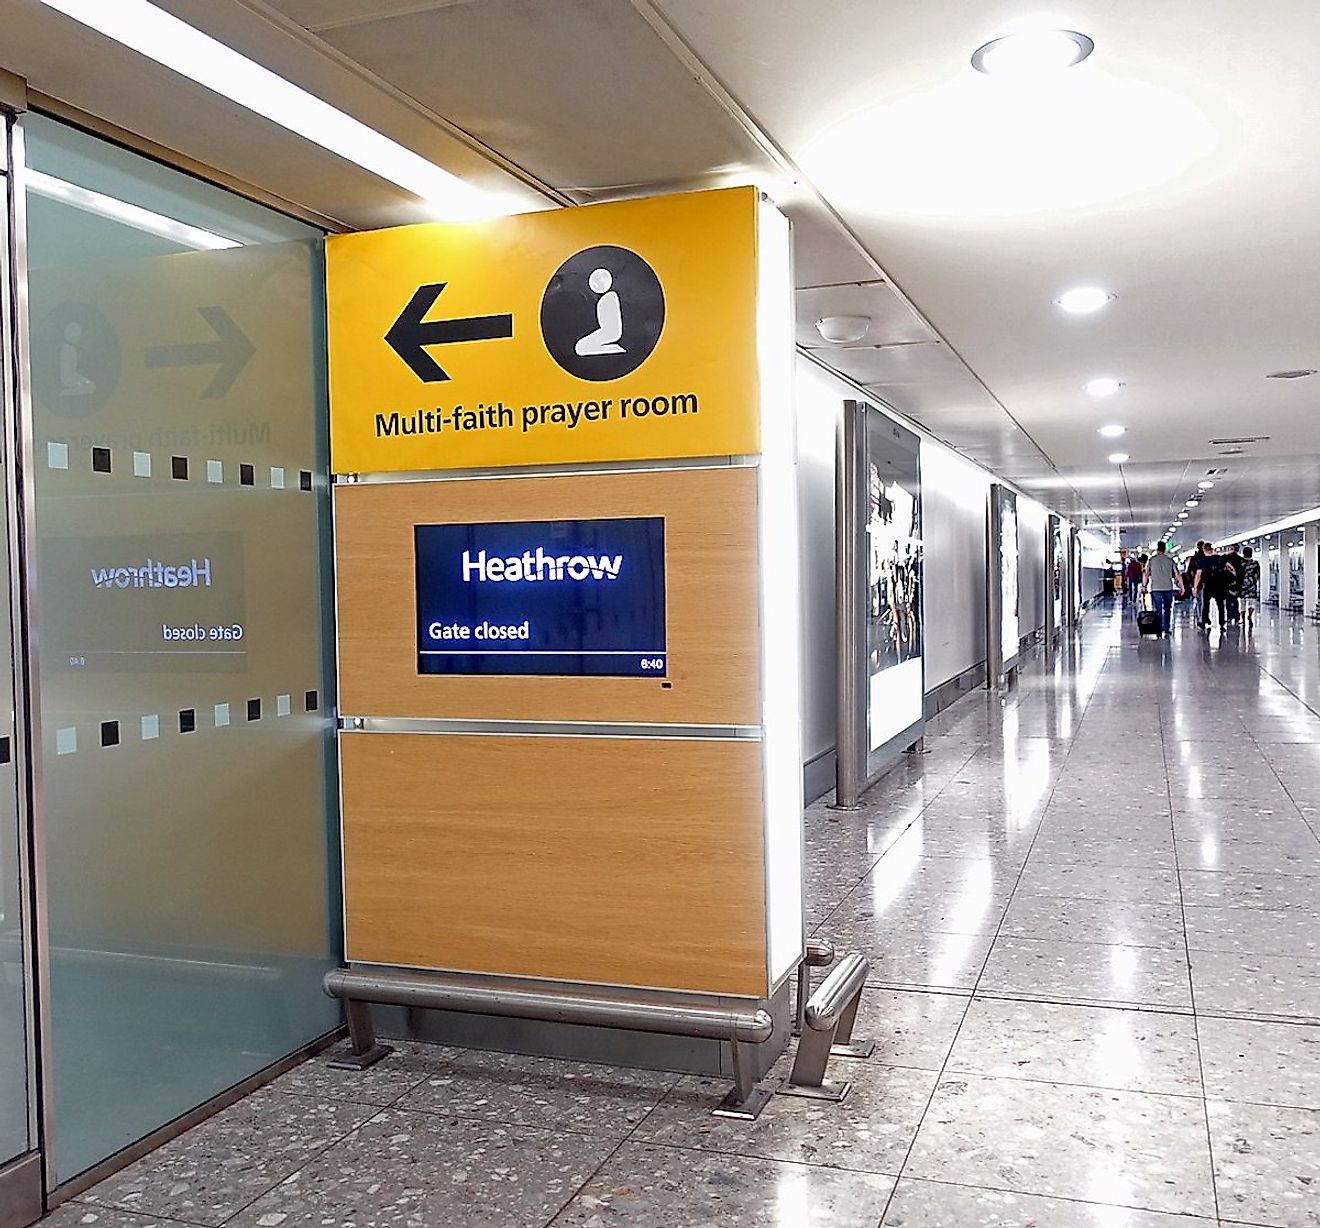 A prayer room at the Heathrow Airport. Image credit: Tiia Monto/Wikimedia.org